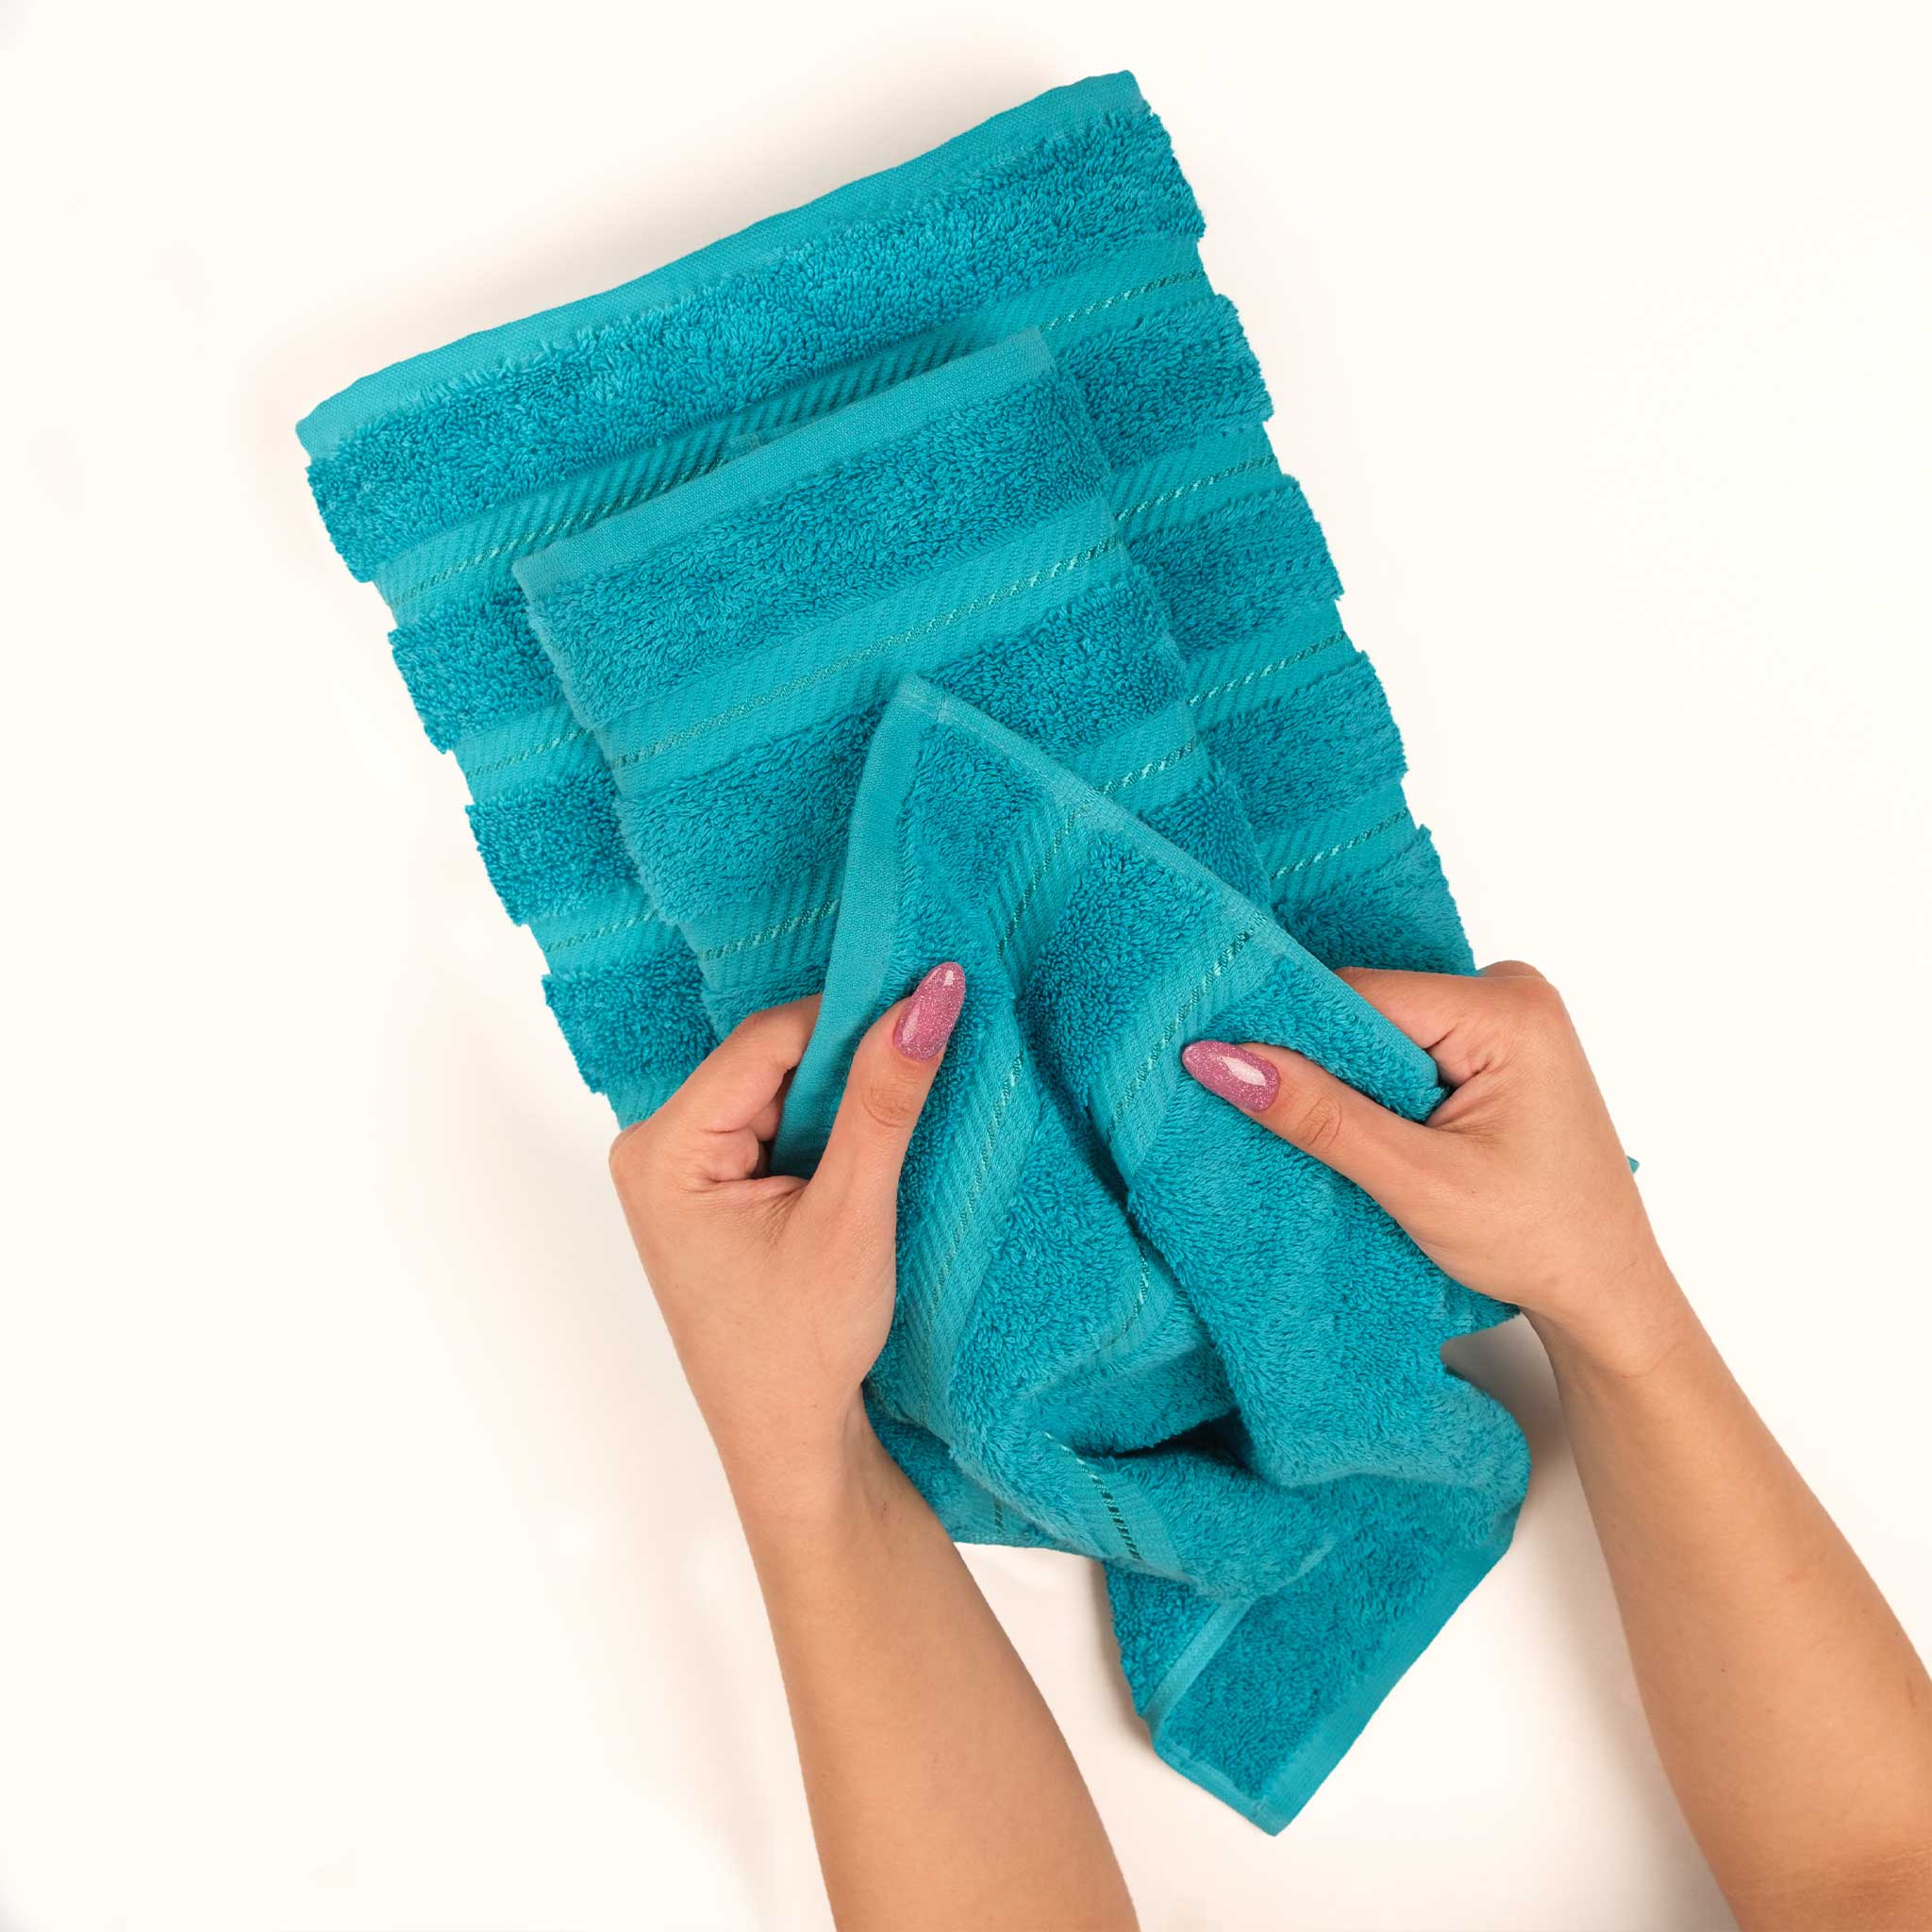 What’s the Best Color for Bath Towels? - American Soft Linen